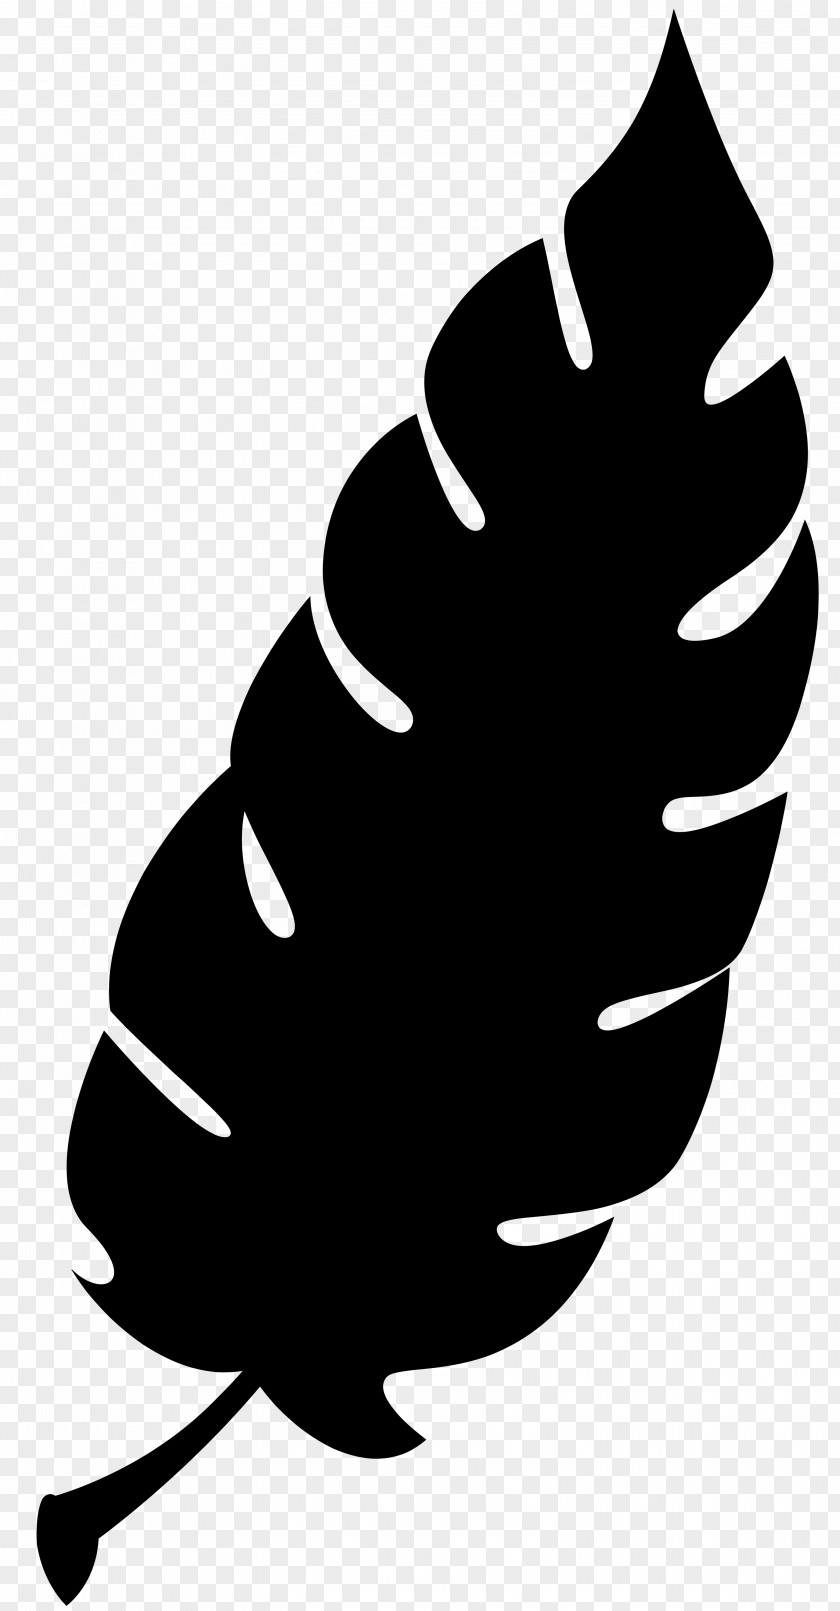 Thumb Leaf Clip Art Silhouette PNG